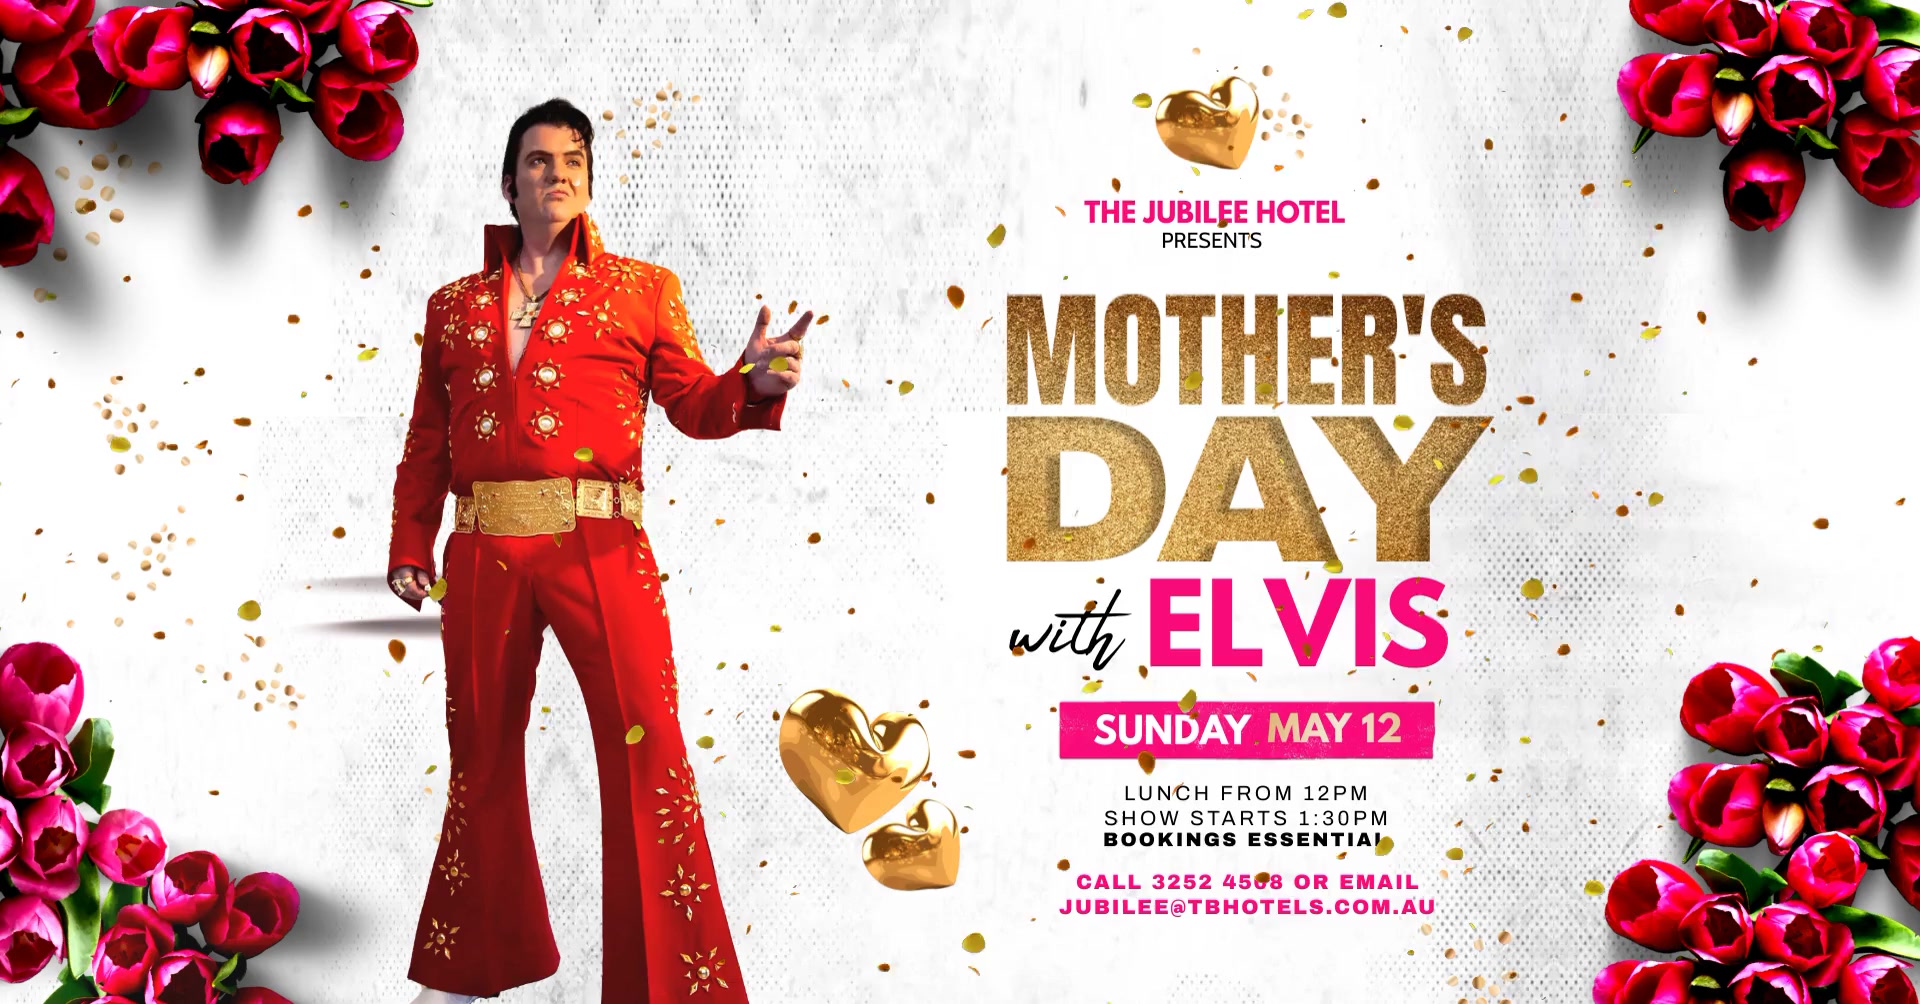 MOTHER'S DAY WITH ELVIS: JUBILEE HOTEL, BRISBANE